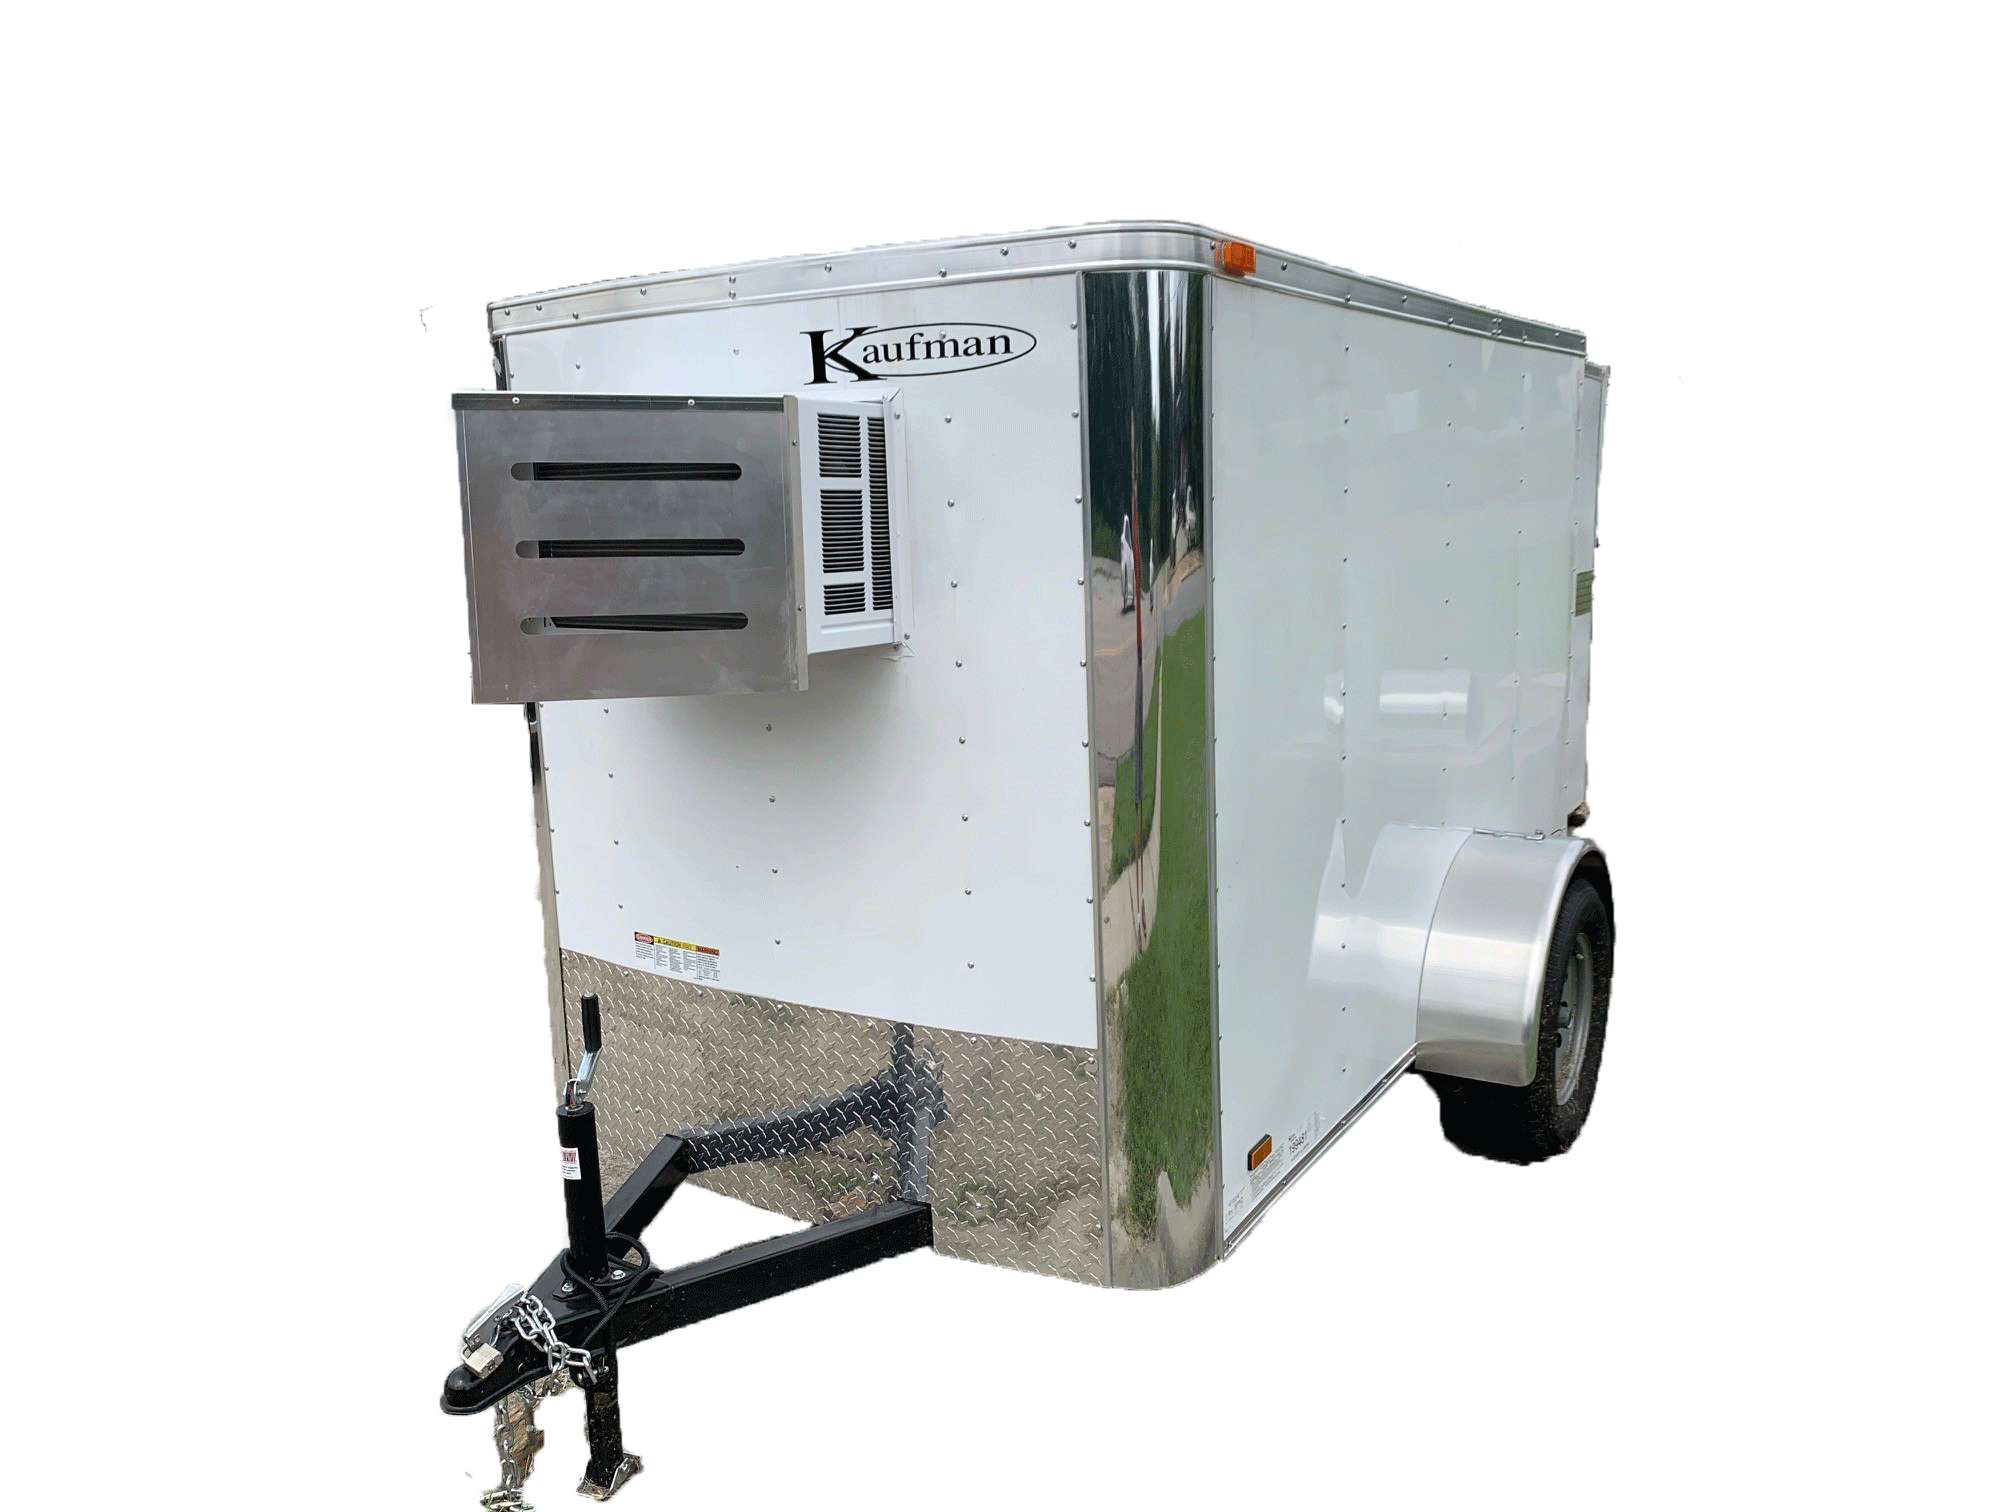 Hanging Meat Trailers for Sale, Small Refrigerated Deer Coolers